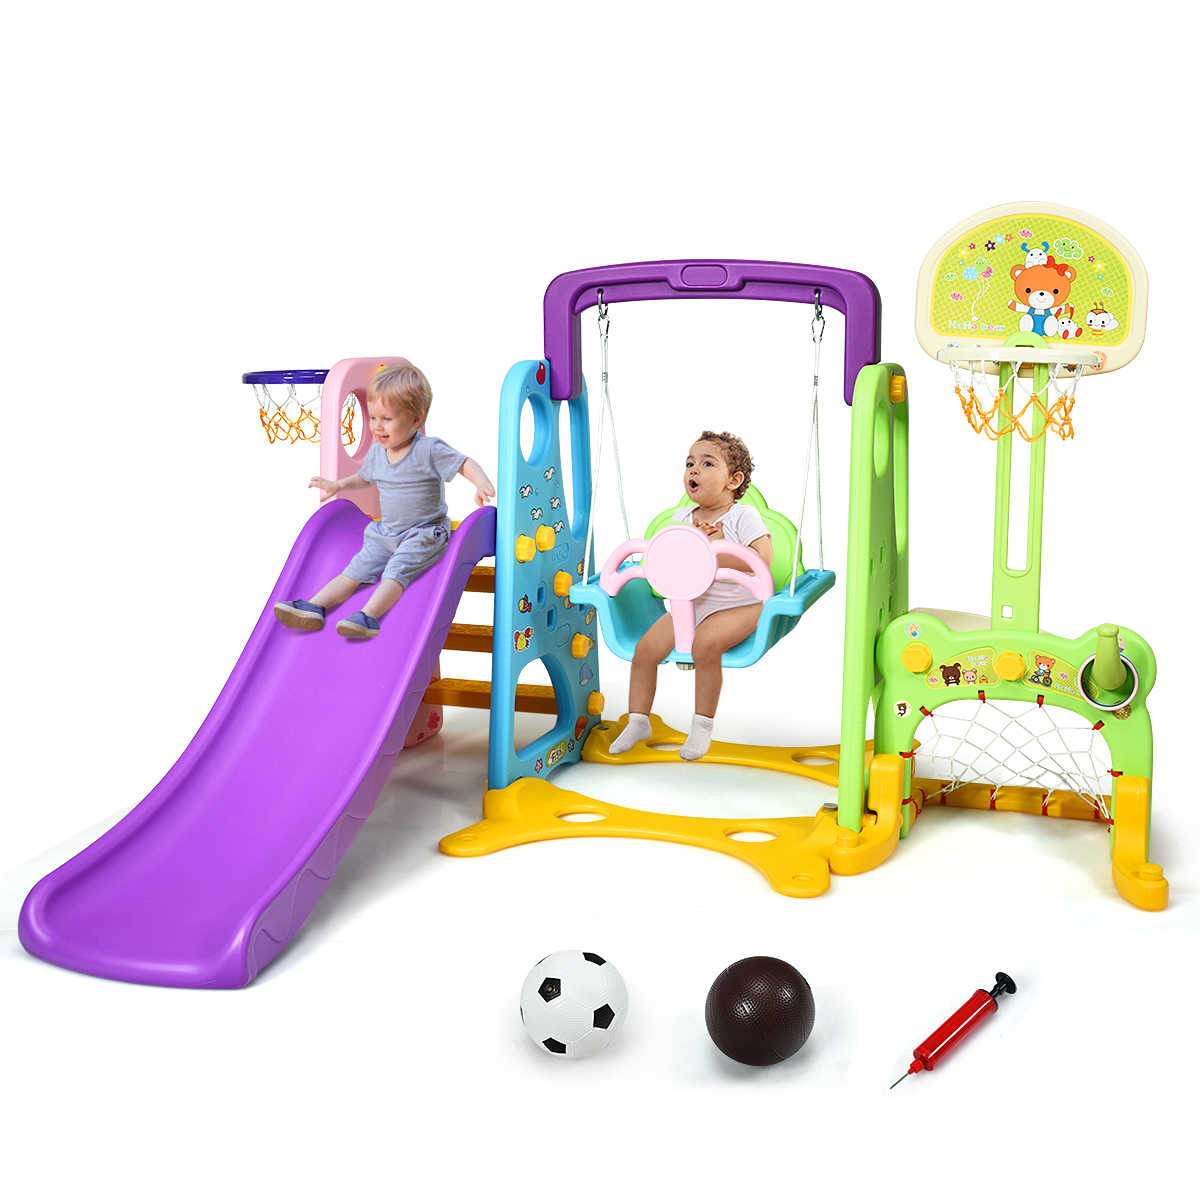 Costway 6-In-1 Toddler Climber and Swing Set with Basketball Hoop & Football Gate Backyard